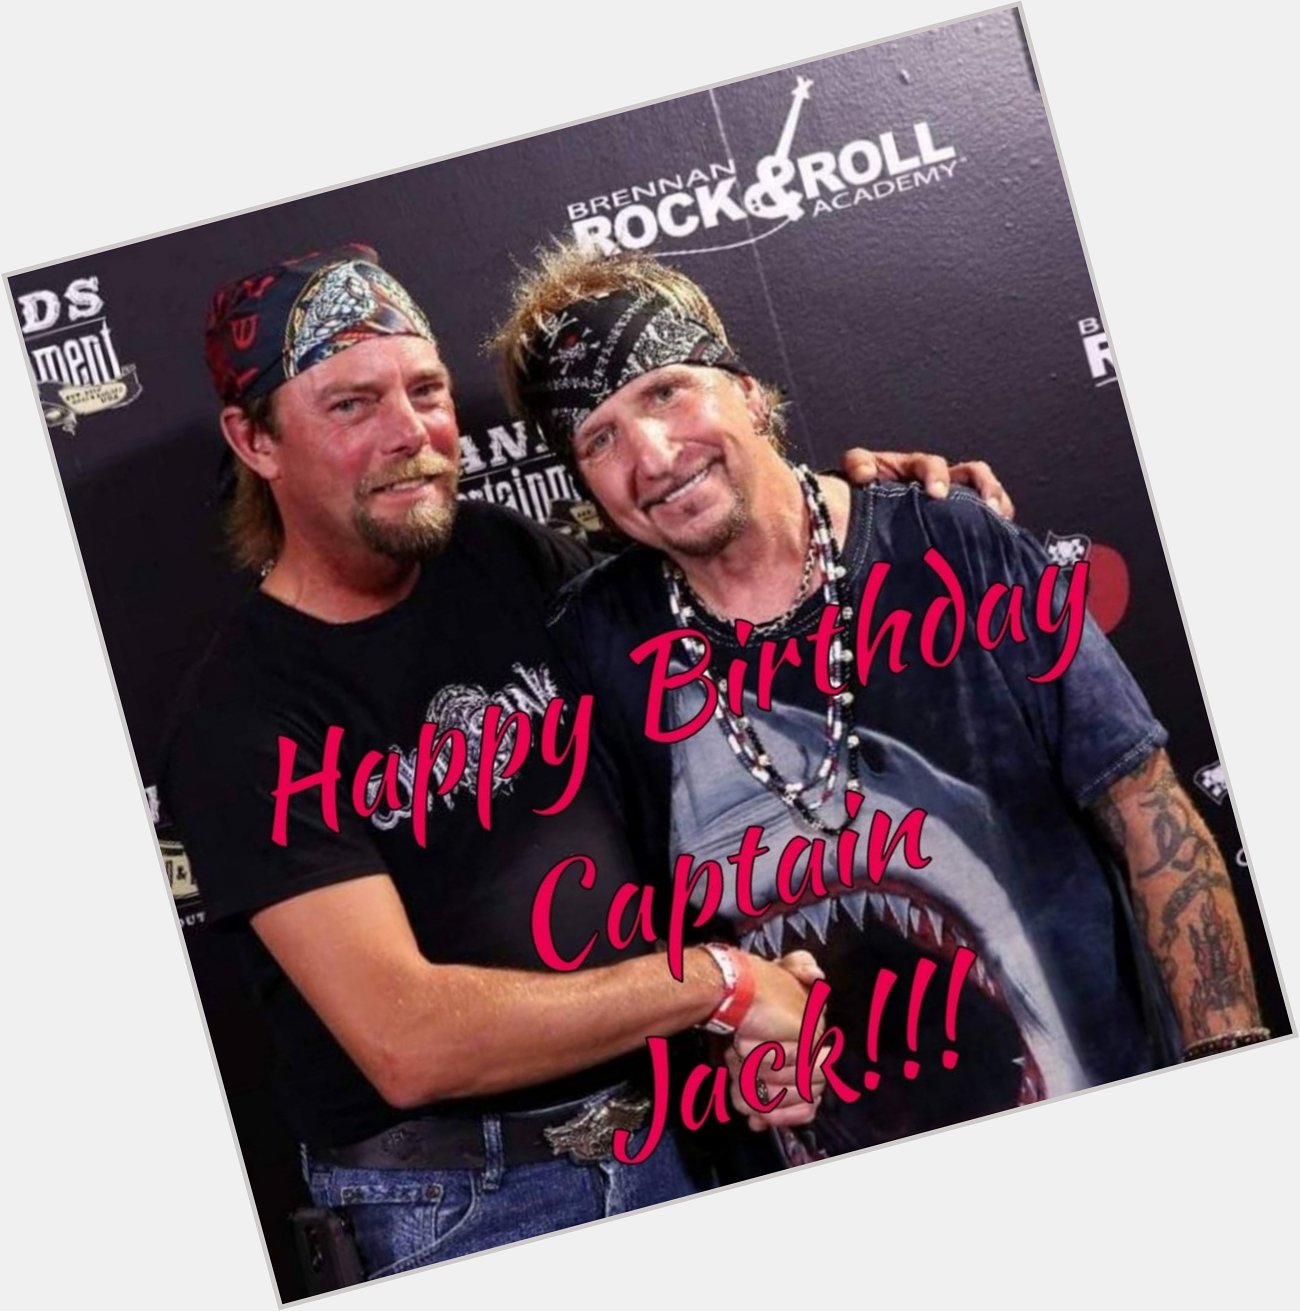 A HUGE Happy Birthday Shout Out Today To Dear Brother Jack Russell!!!
CHEERS!!!
All The Best!!!         